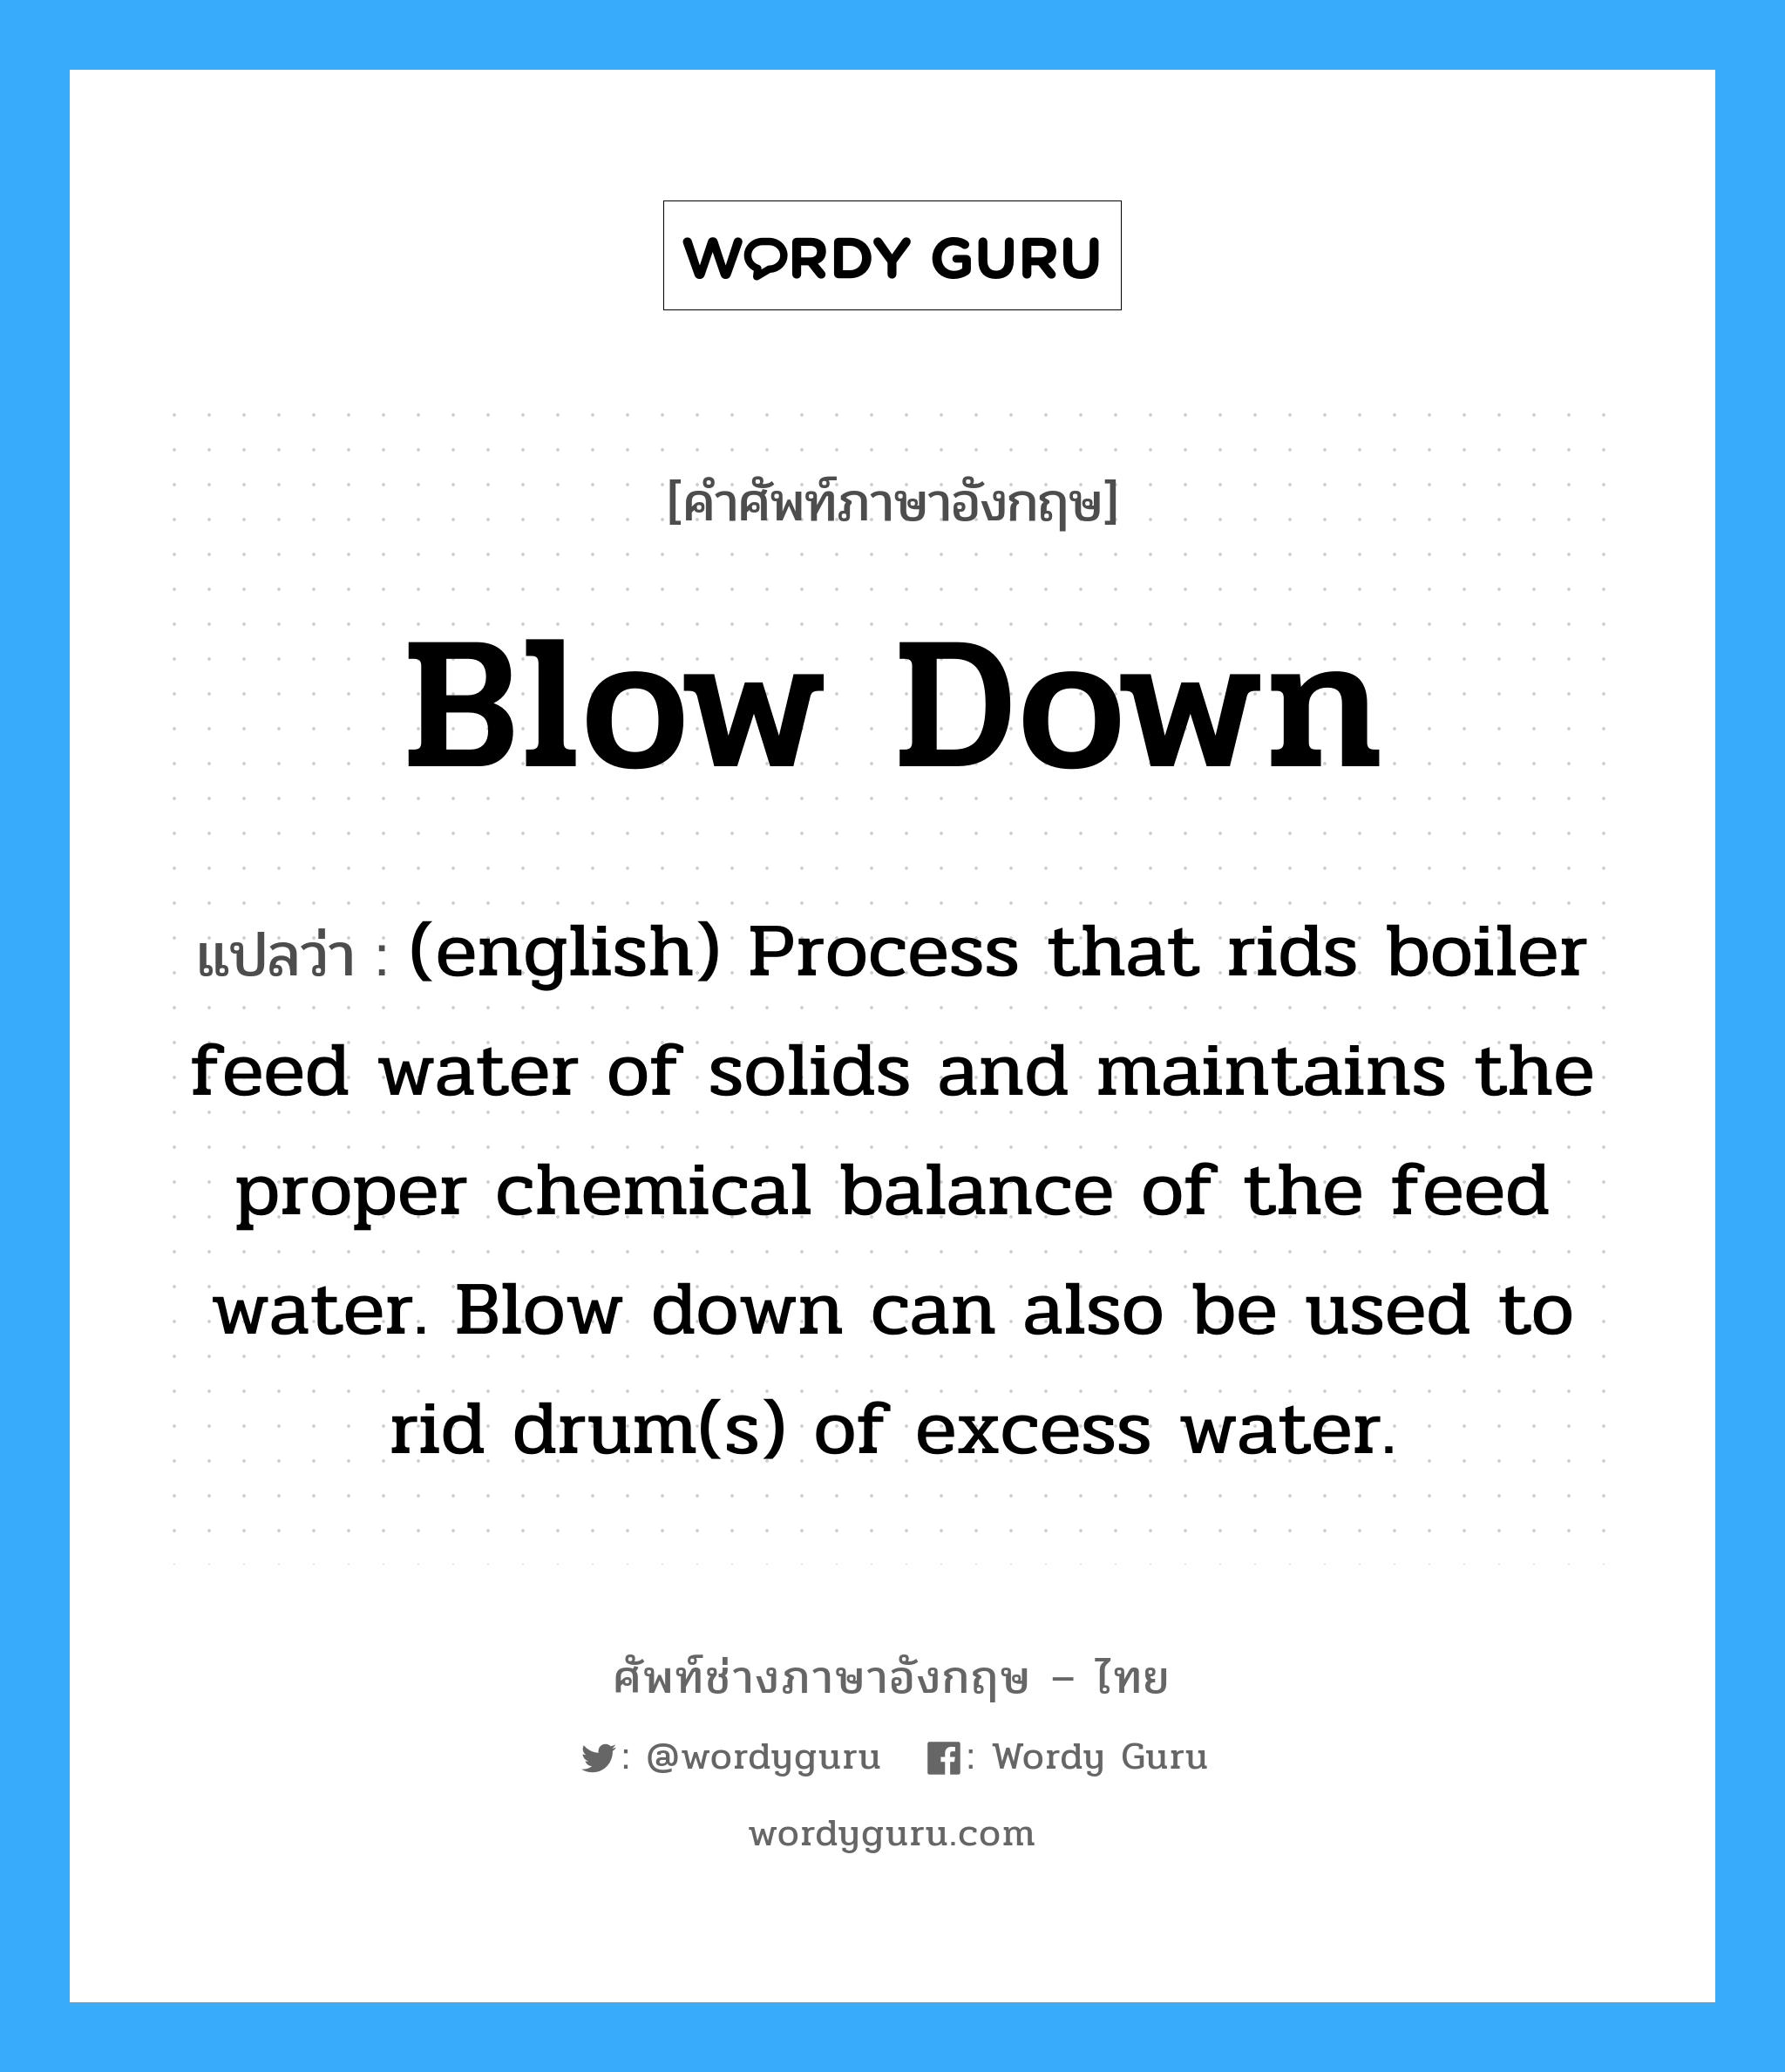 (english) Process that rids boiler feed water of solids and maintains the proper chemical balance of the feed water. Blow down can also be used to rid drum(s) of excess water. ภาษาอังกฤษ?, คำศัพท์ช่างภาษาอังกฤษ - ไทย (english) Process that rids boiler feed water of solids and maintains the proper chemical balance of the feed water. Blow down can also be used to rid drum(s) of excess water. คำศัพท์ภาษาอังกฤษ (english) Process that rids boiler feed water of solids and maintains the proper chemical balance of the feed water. Blow down can also be used to rid drum(s) of excess water. แปลว่า Blow Down